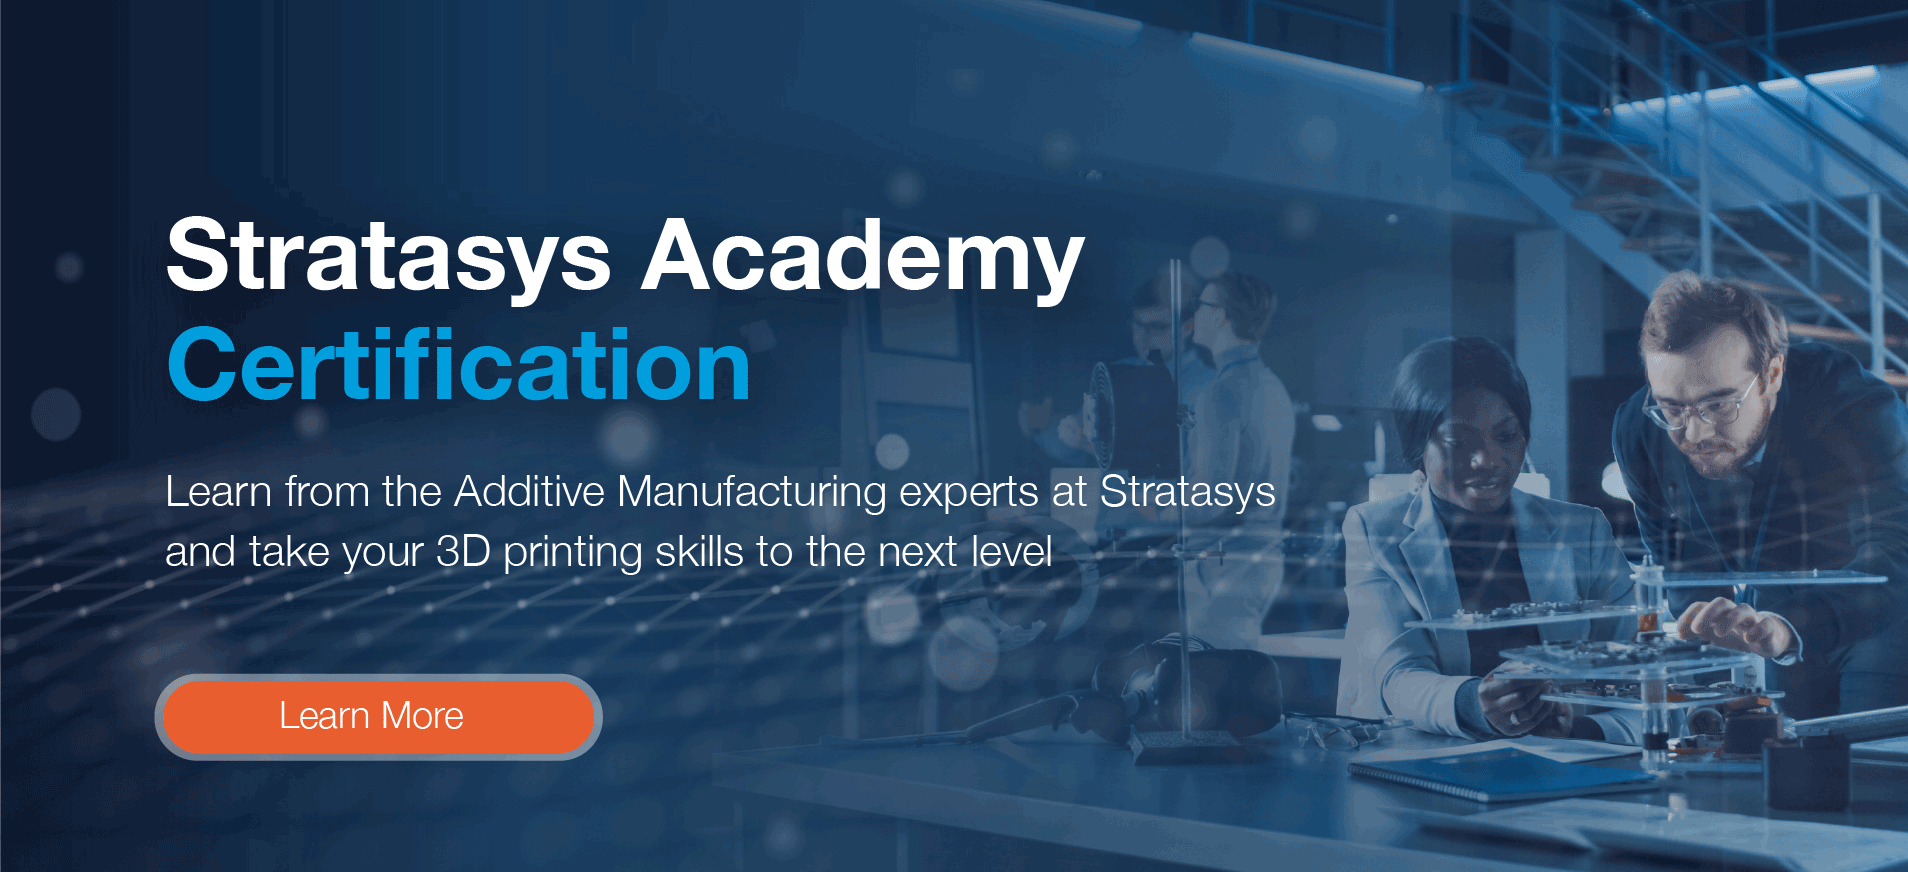 Stratasys 3D Printing Certification Academy - Learn from our experts, because your brands success is our top priority.